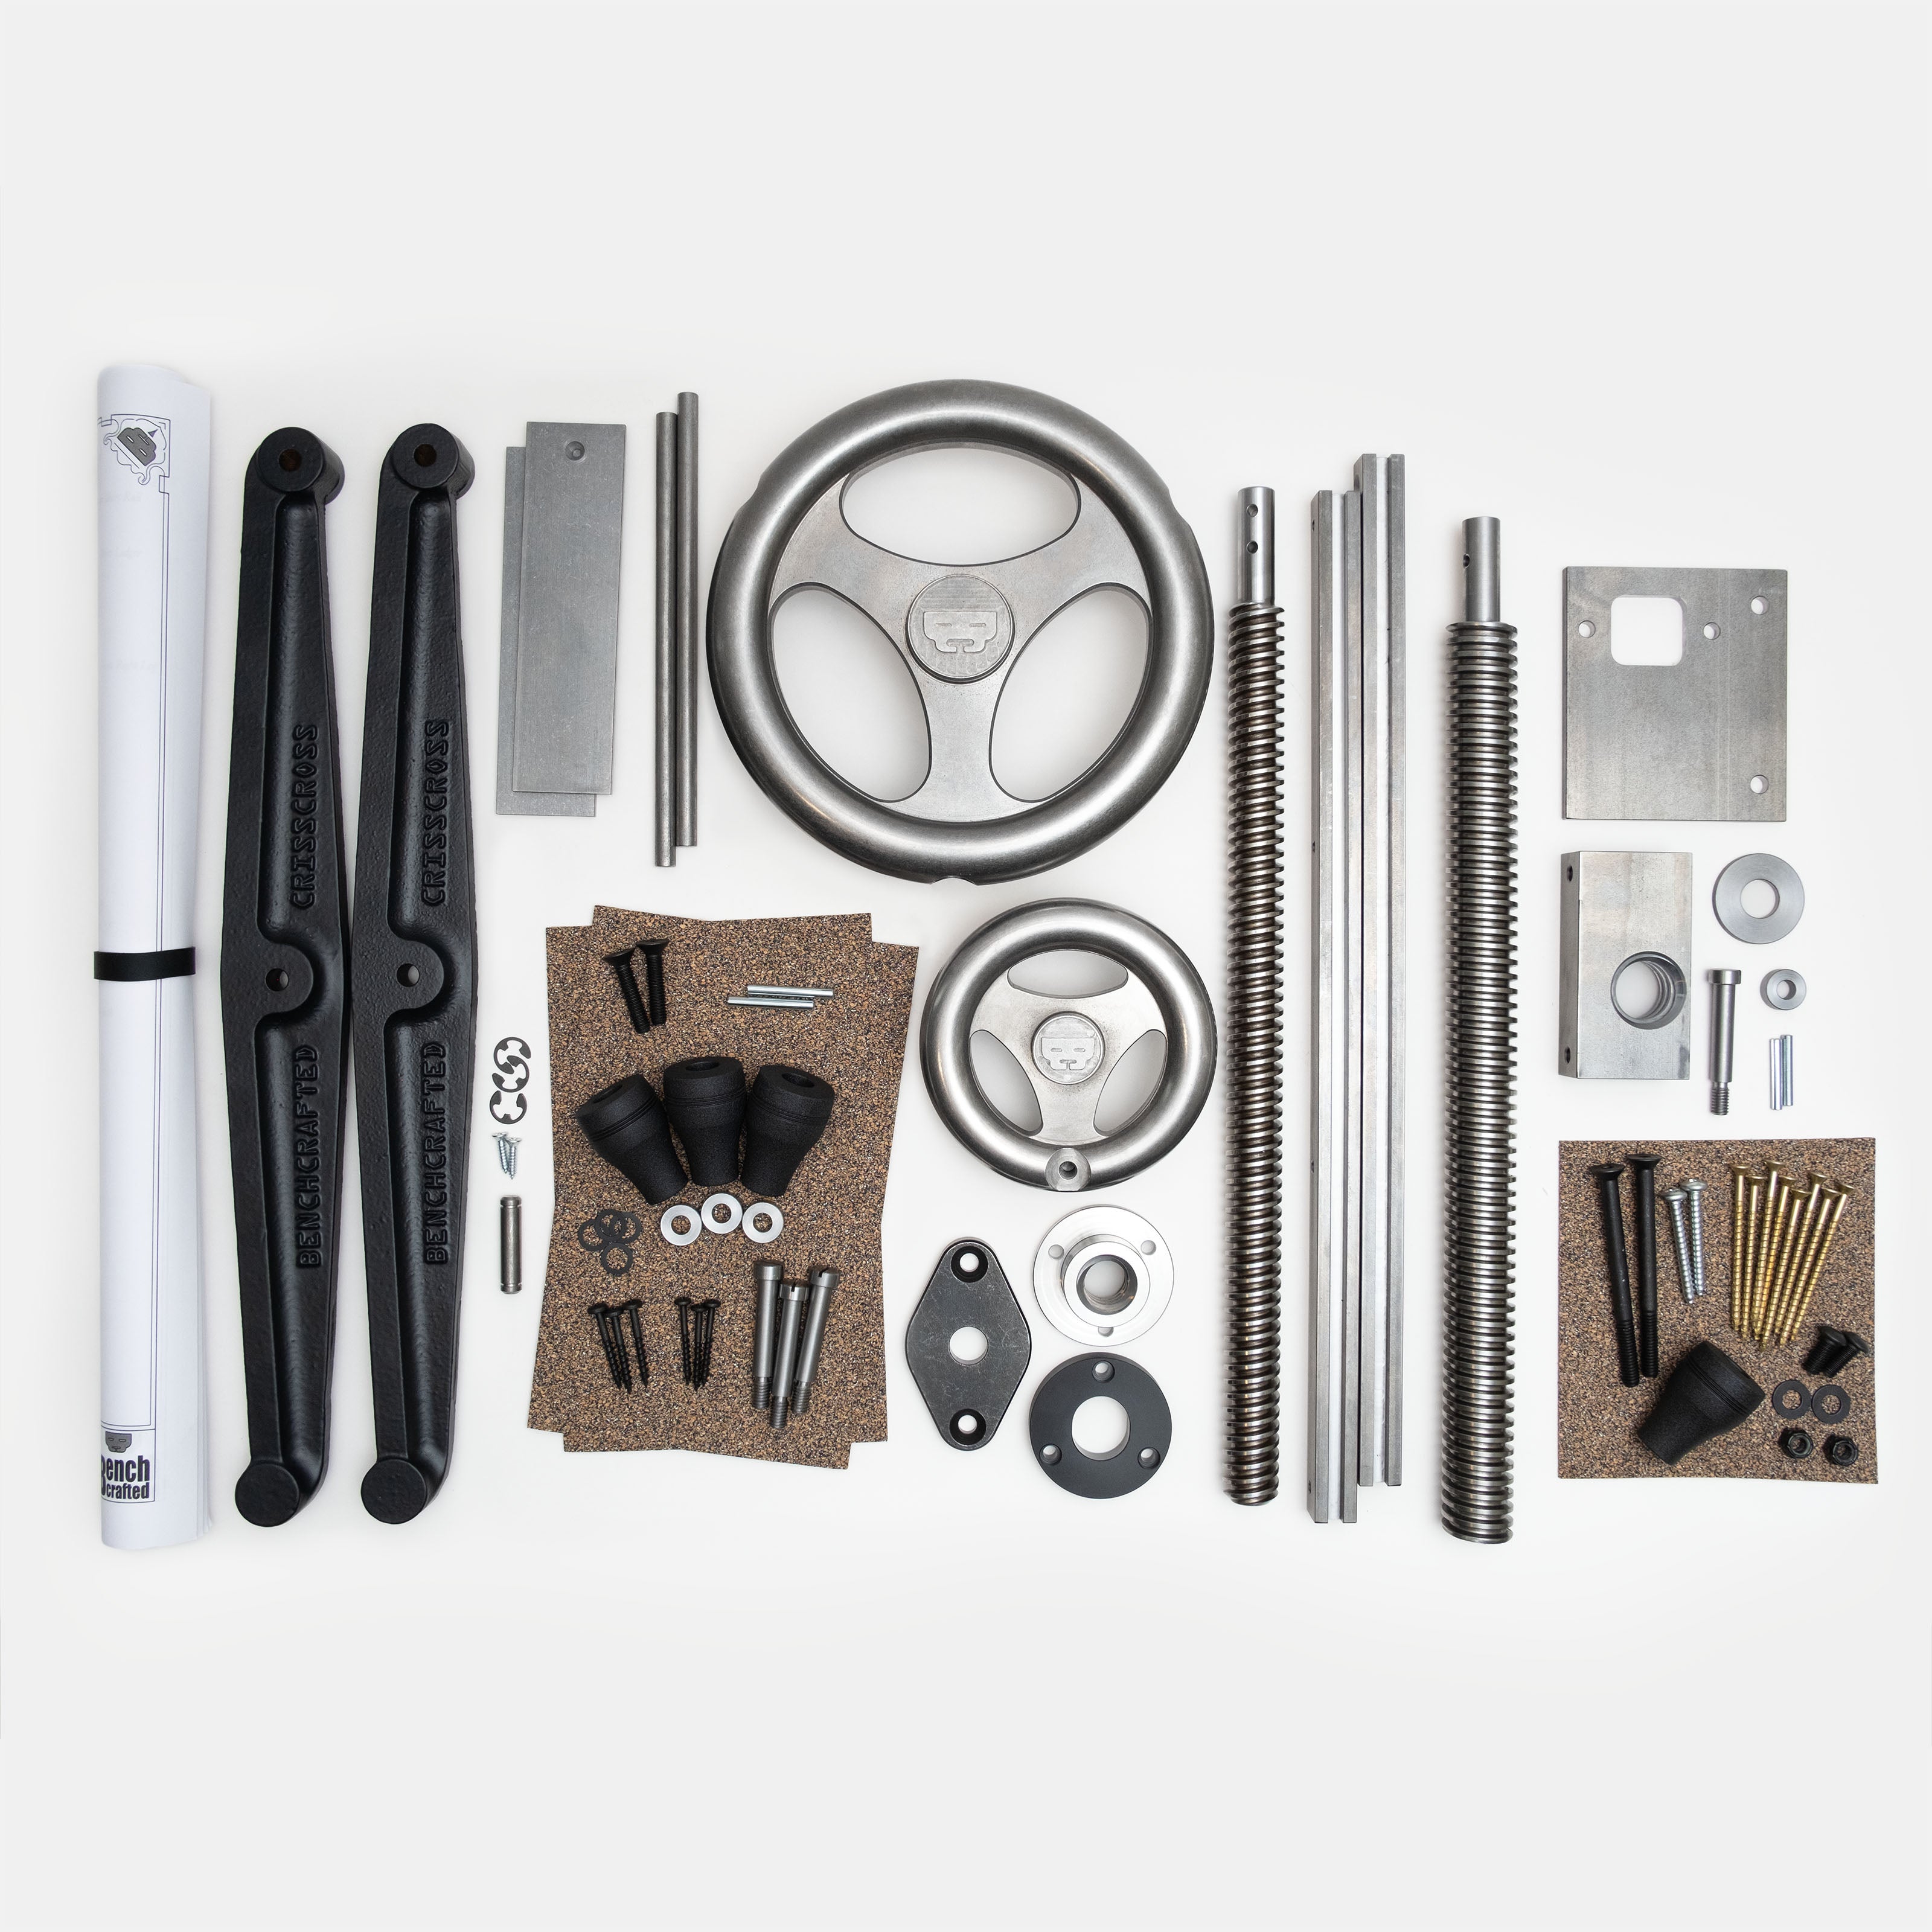 Benchmaker's Package